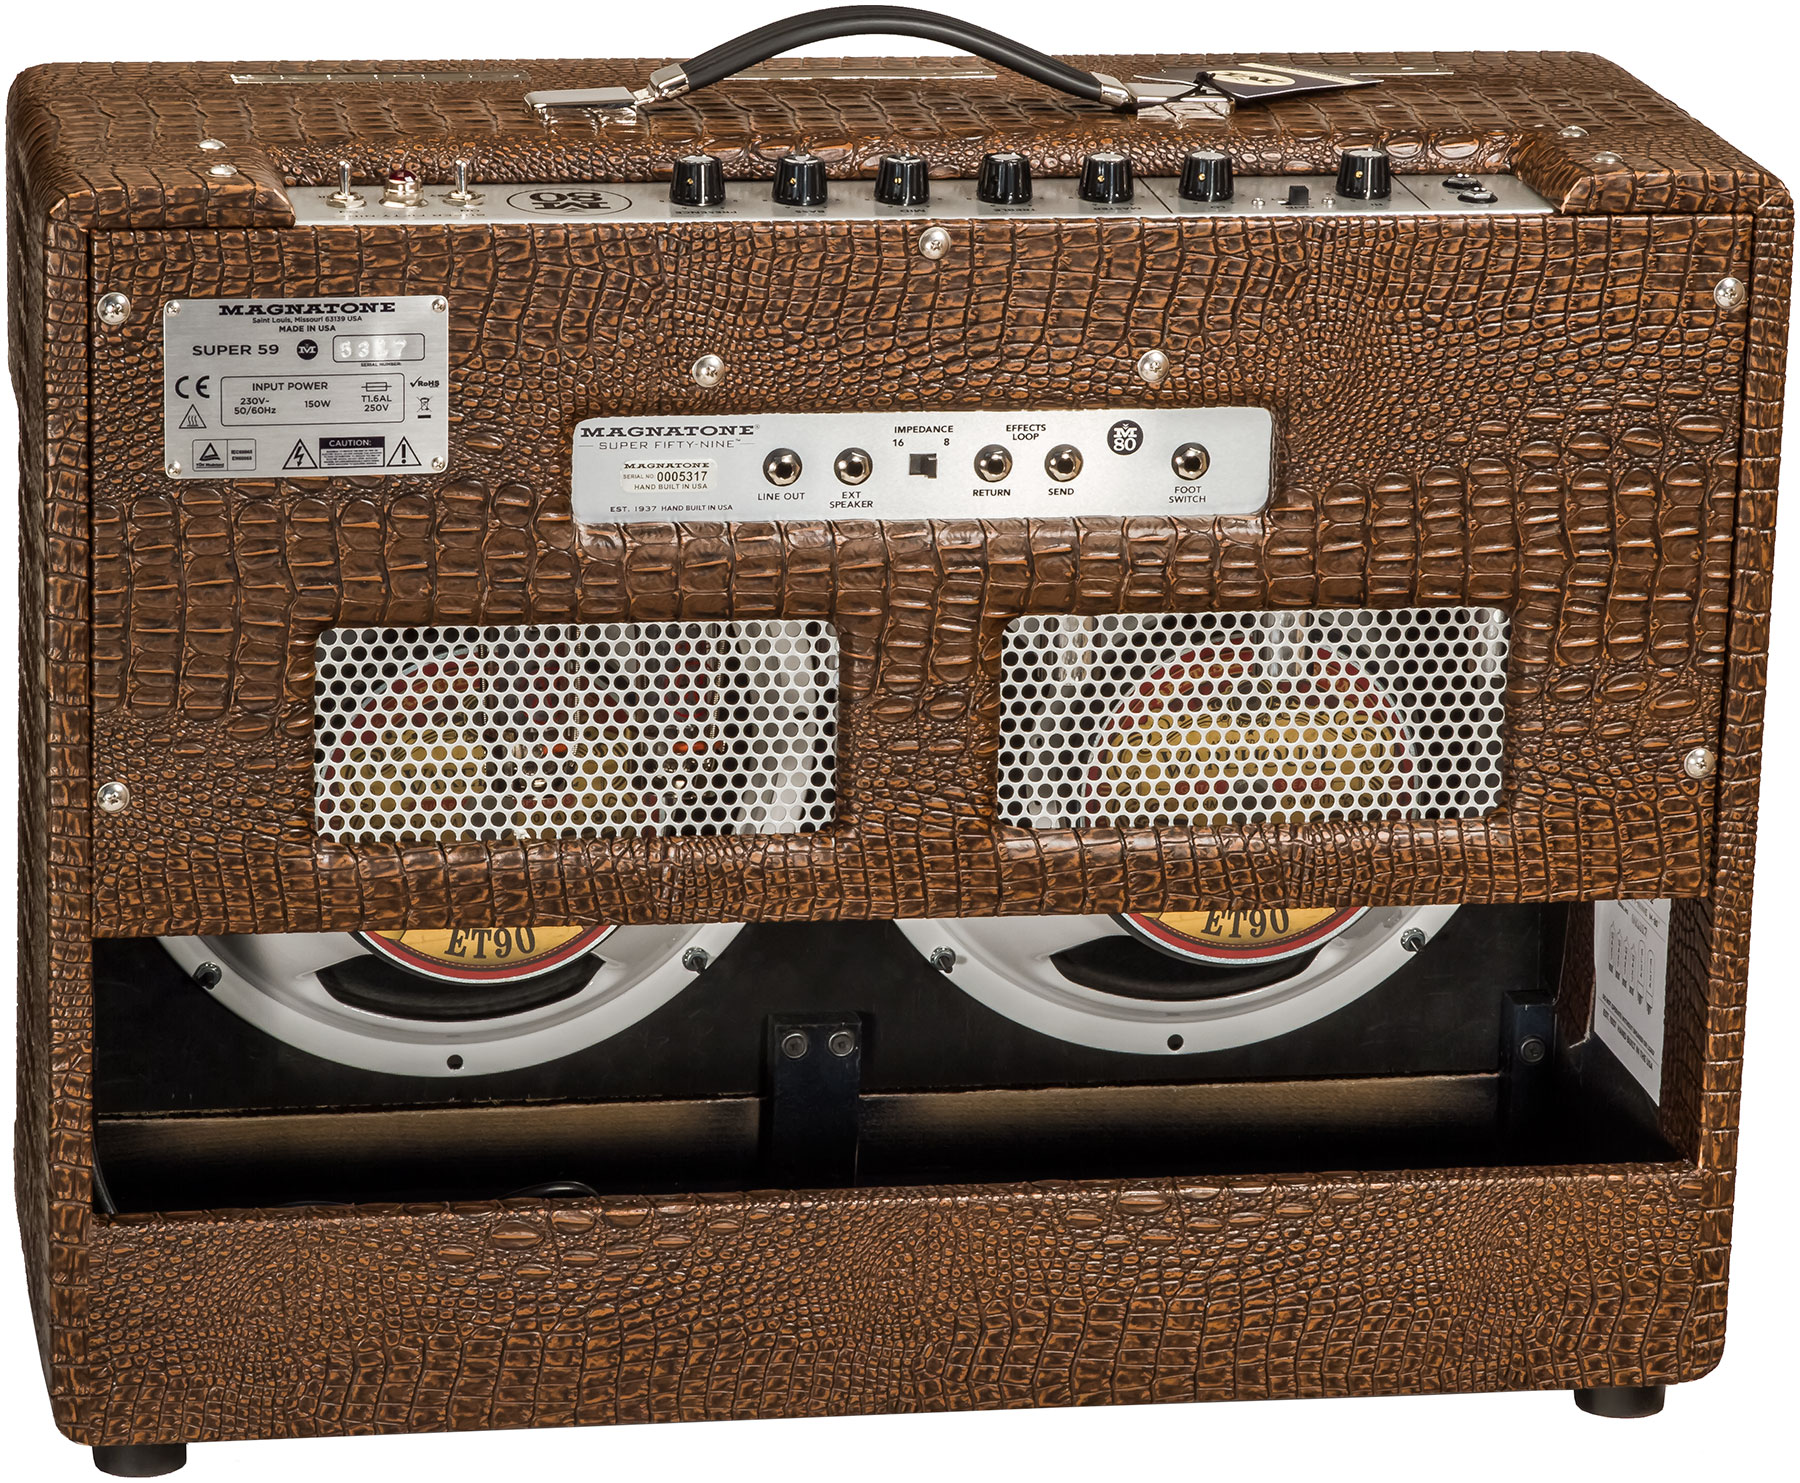 Magnatone Master Collection Super Fifty-nine M-80 Combo 45w 2x12 Croc Ostridge Brown - Electric guitar combo amp - Variation 1